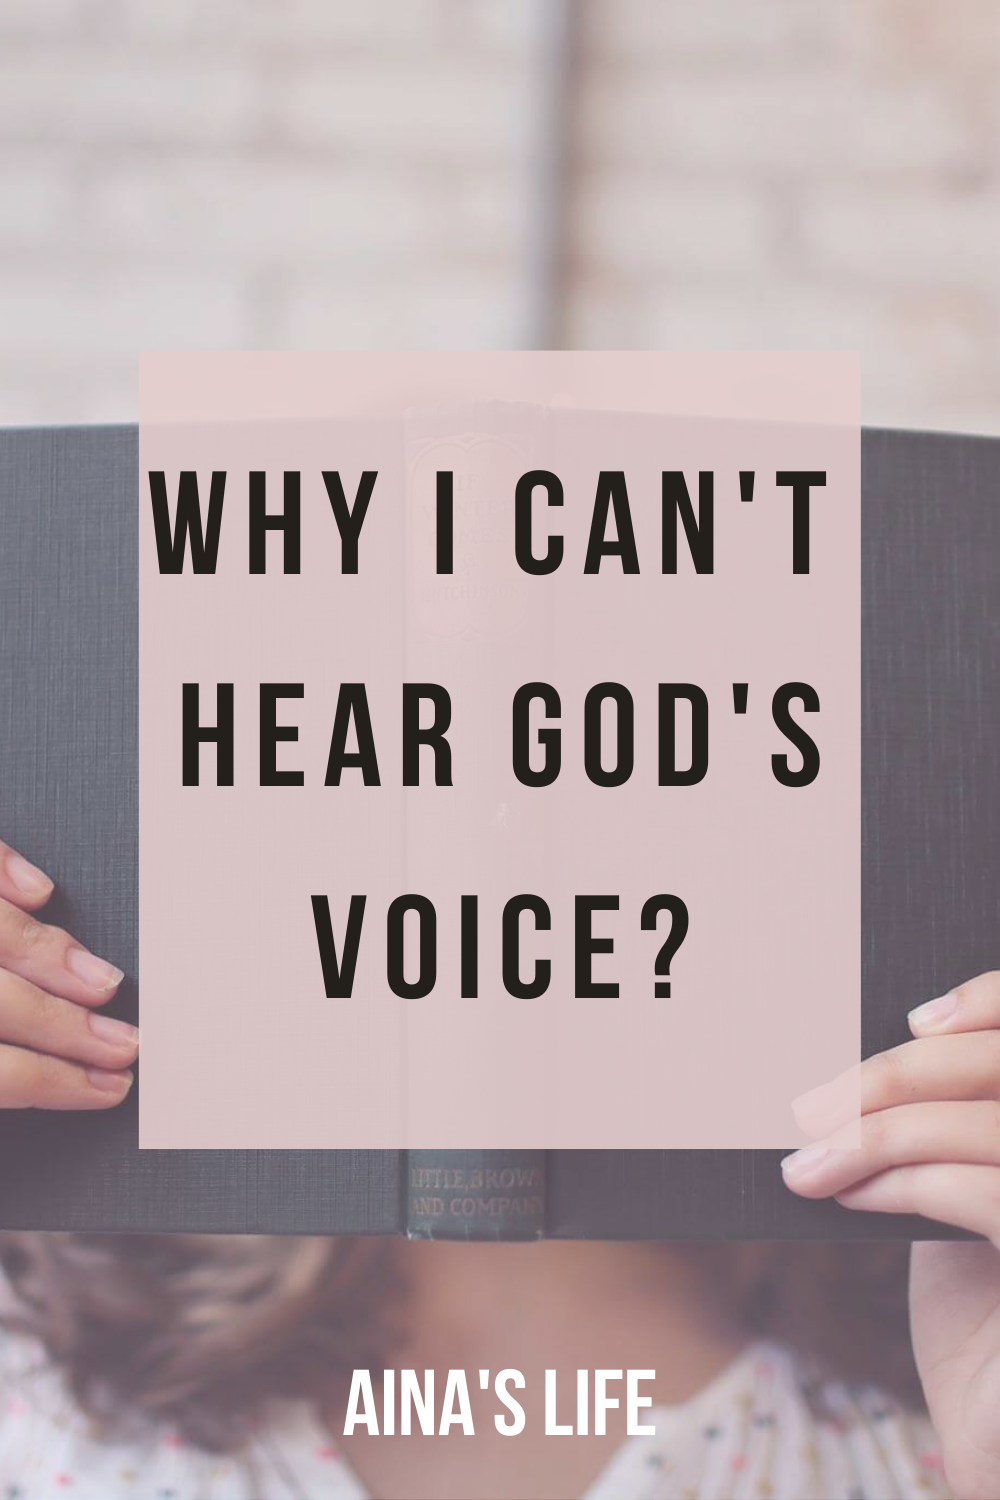 me asking myself why i can't hear god's voice